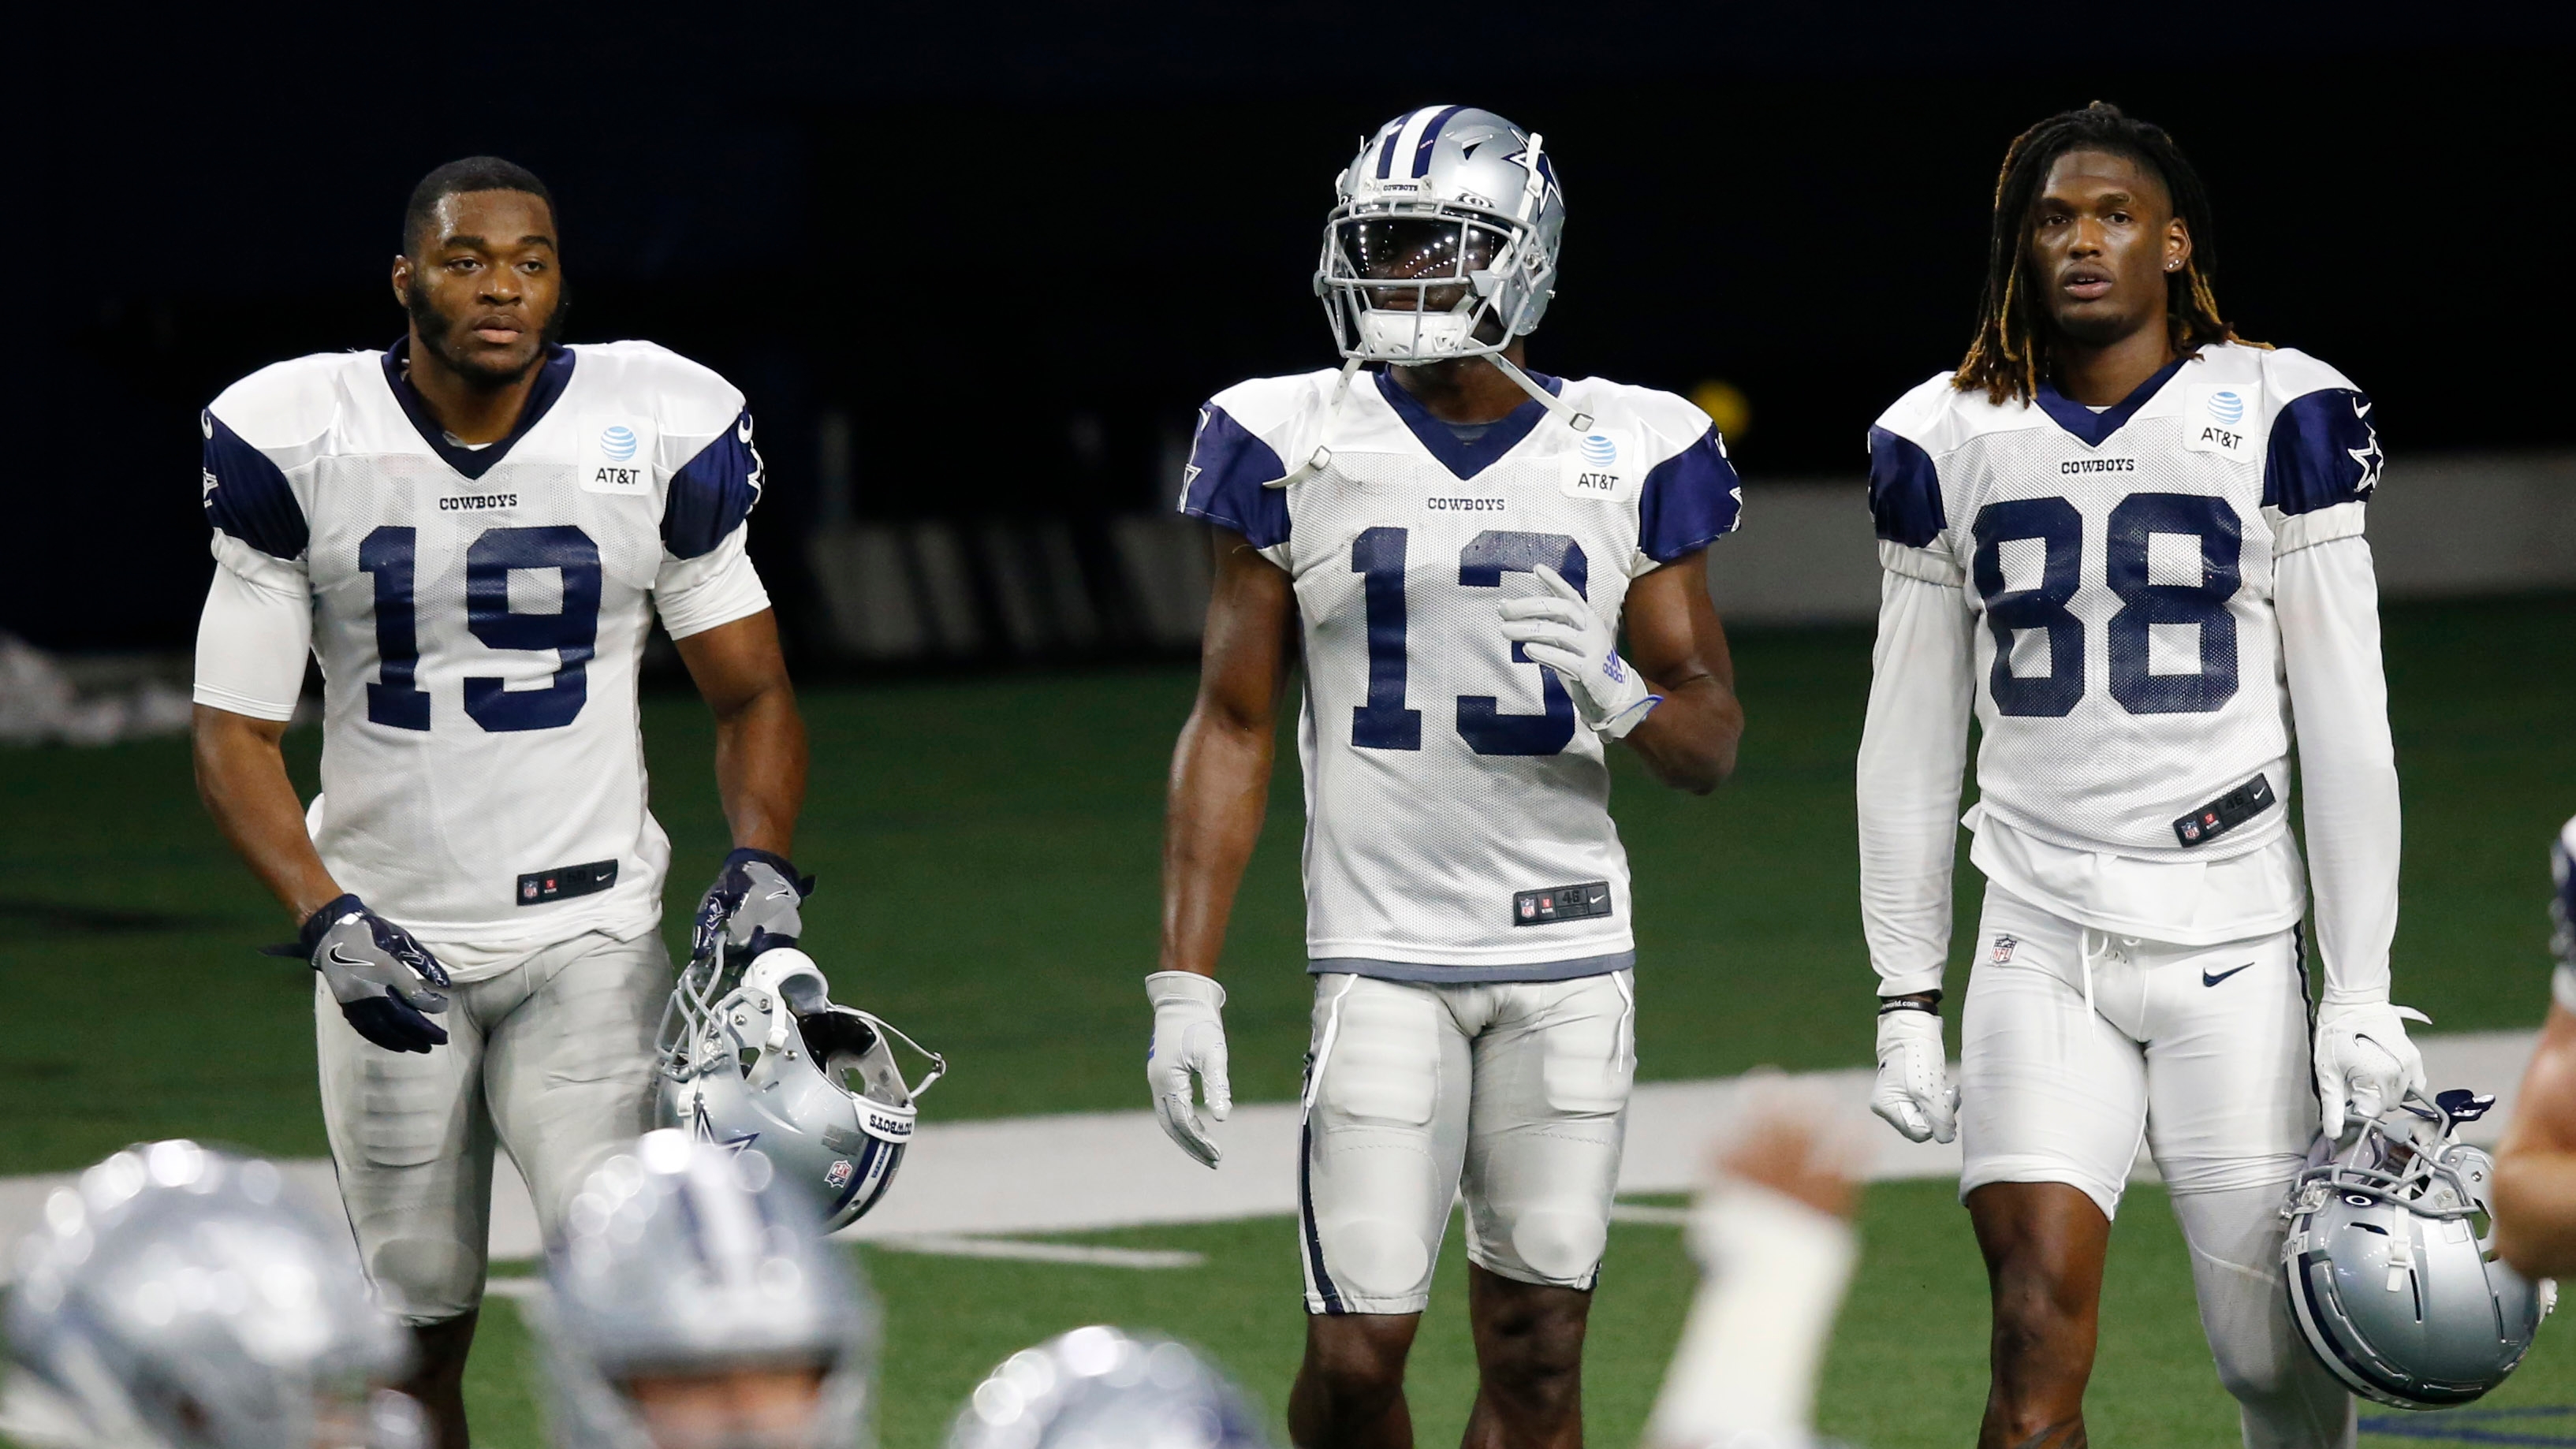 By failing to live up to high expectations, the Cowboys' Big Three